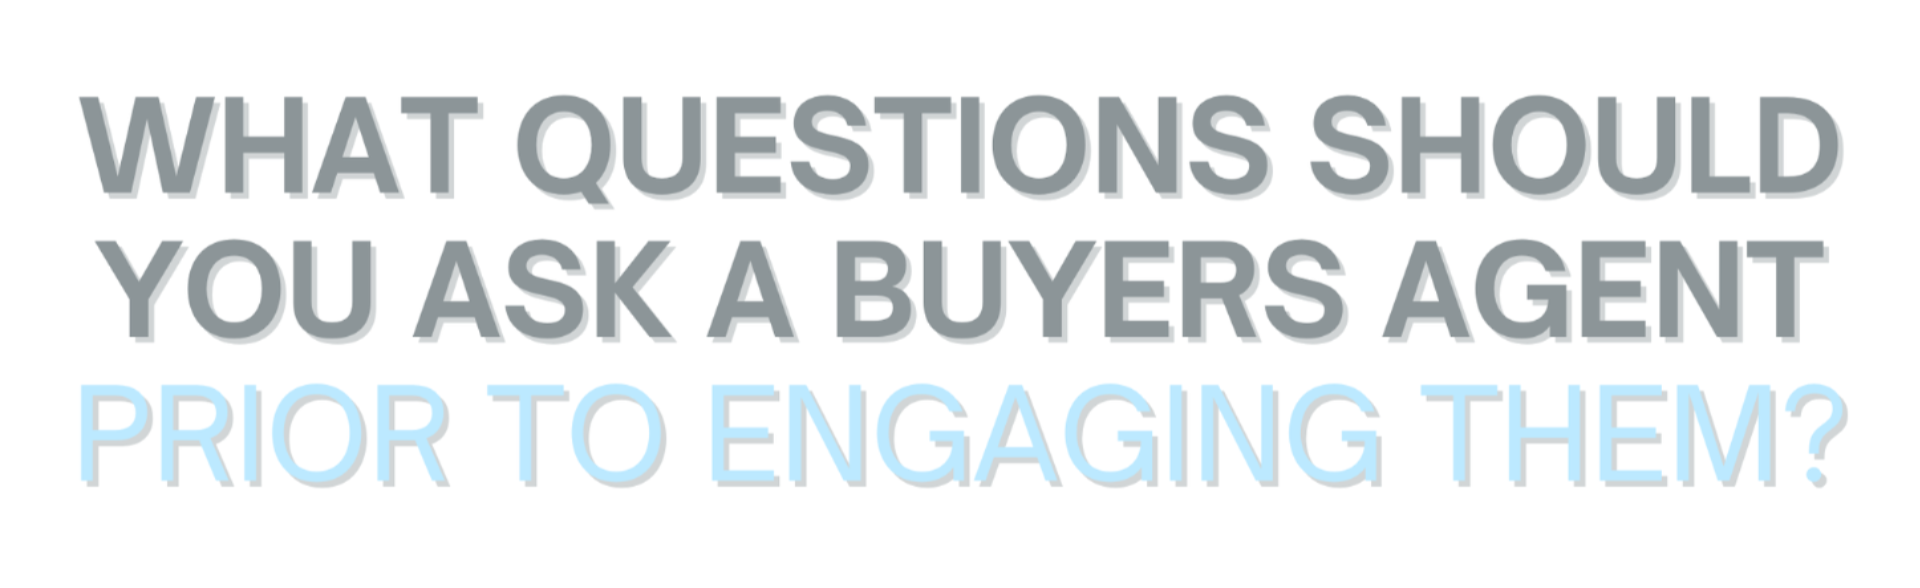 What Questions Should You Ask a Buyers Agent Prior To Engaging Them